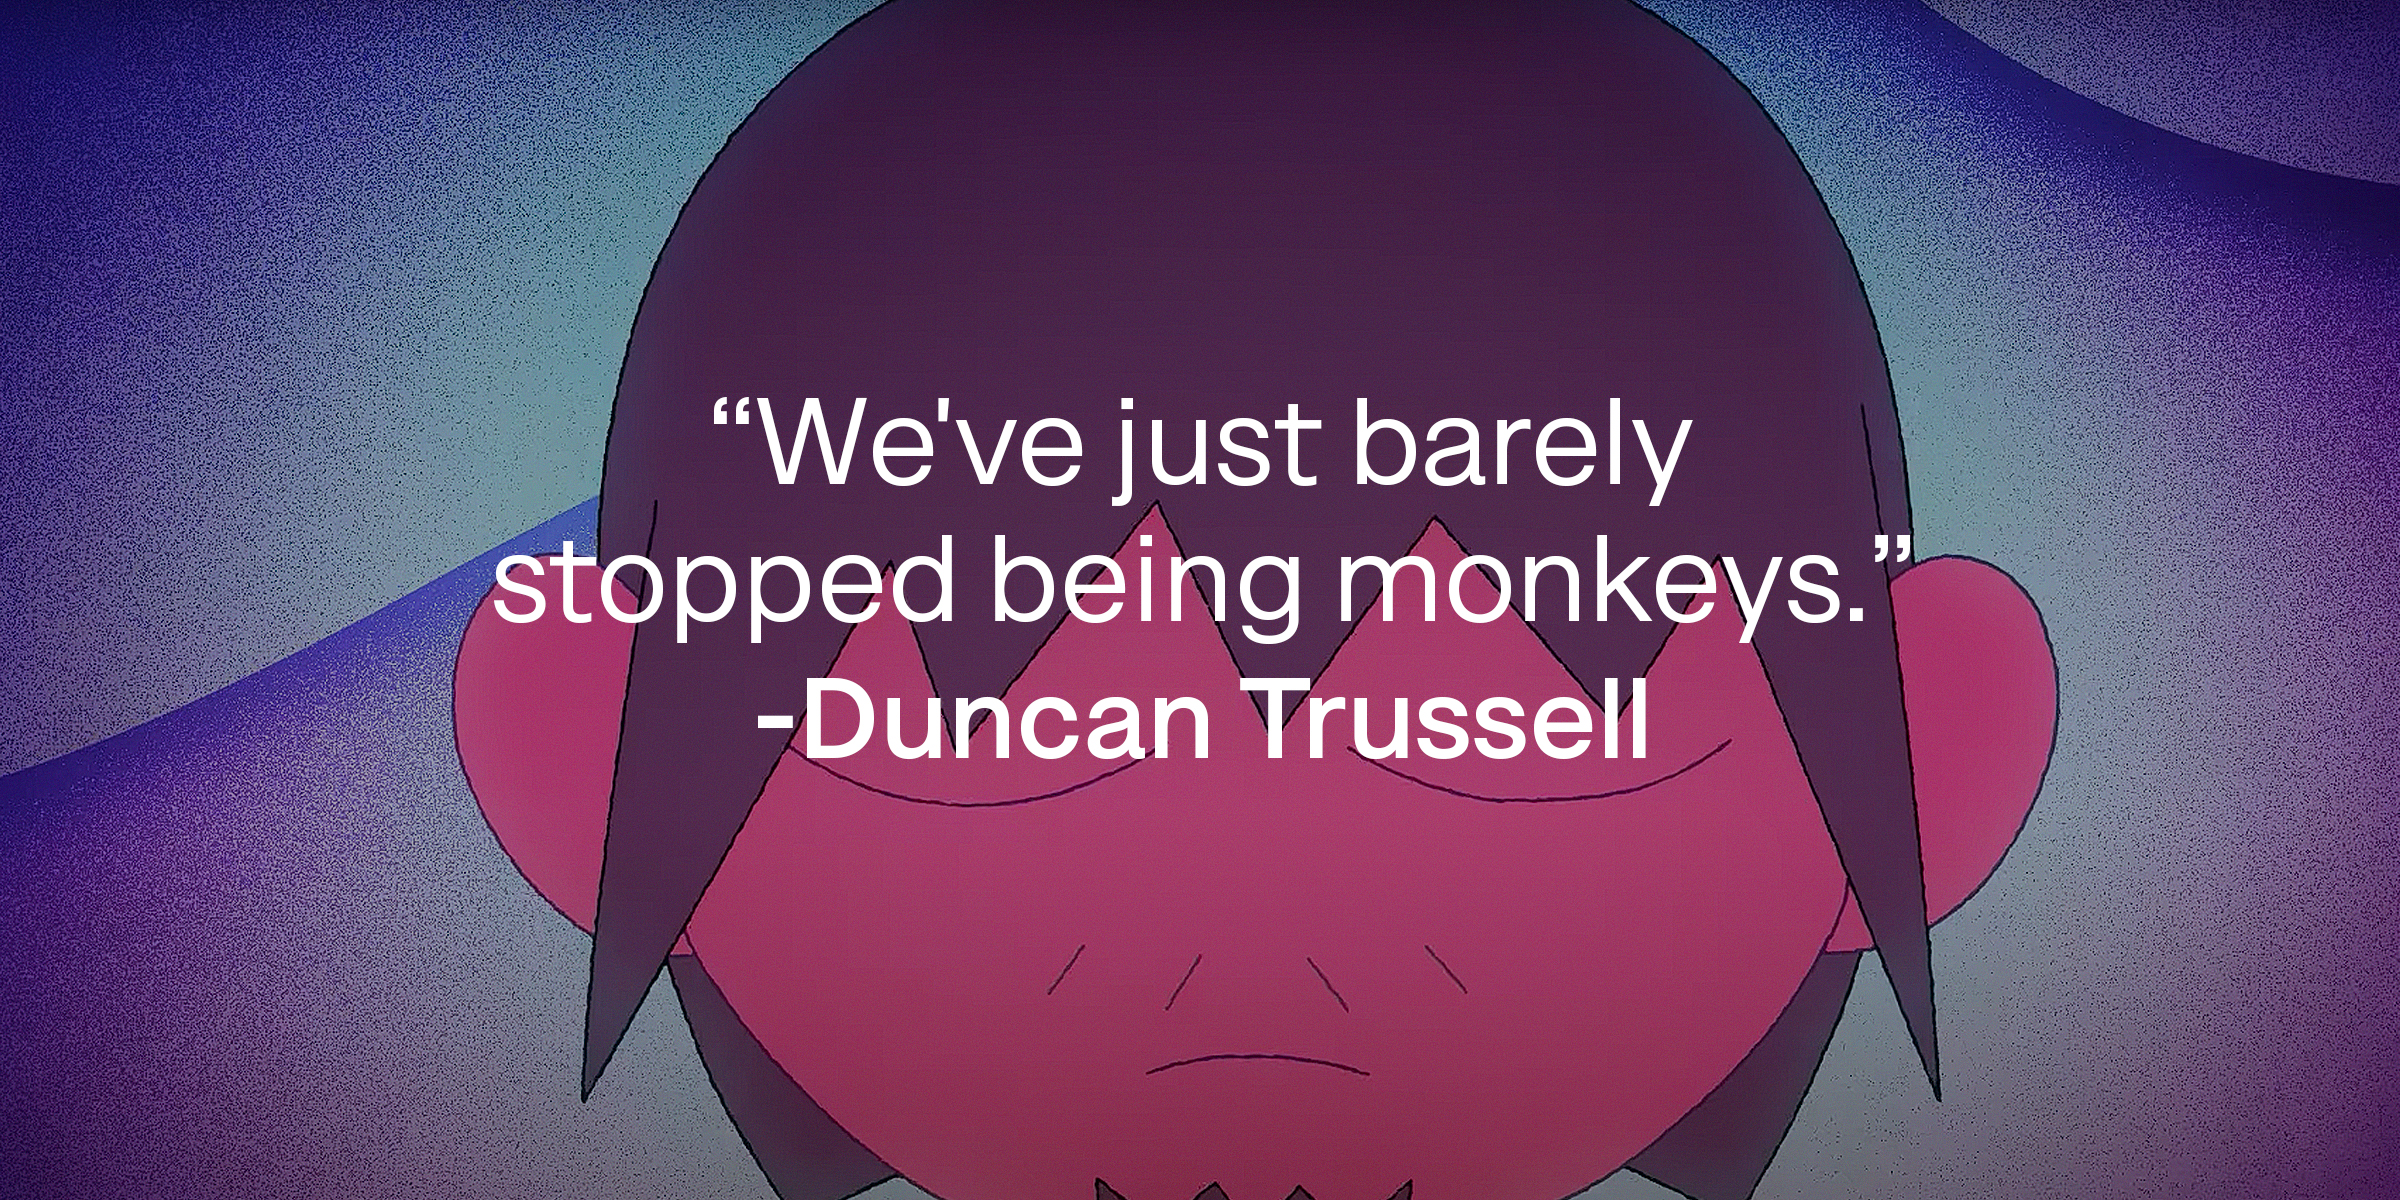 Clancy's photo with a quote by Duncan Trussell: "We've just barely stopped being monkeys."| Source: youtube.com/Netflix